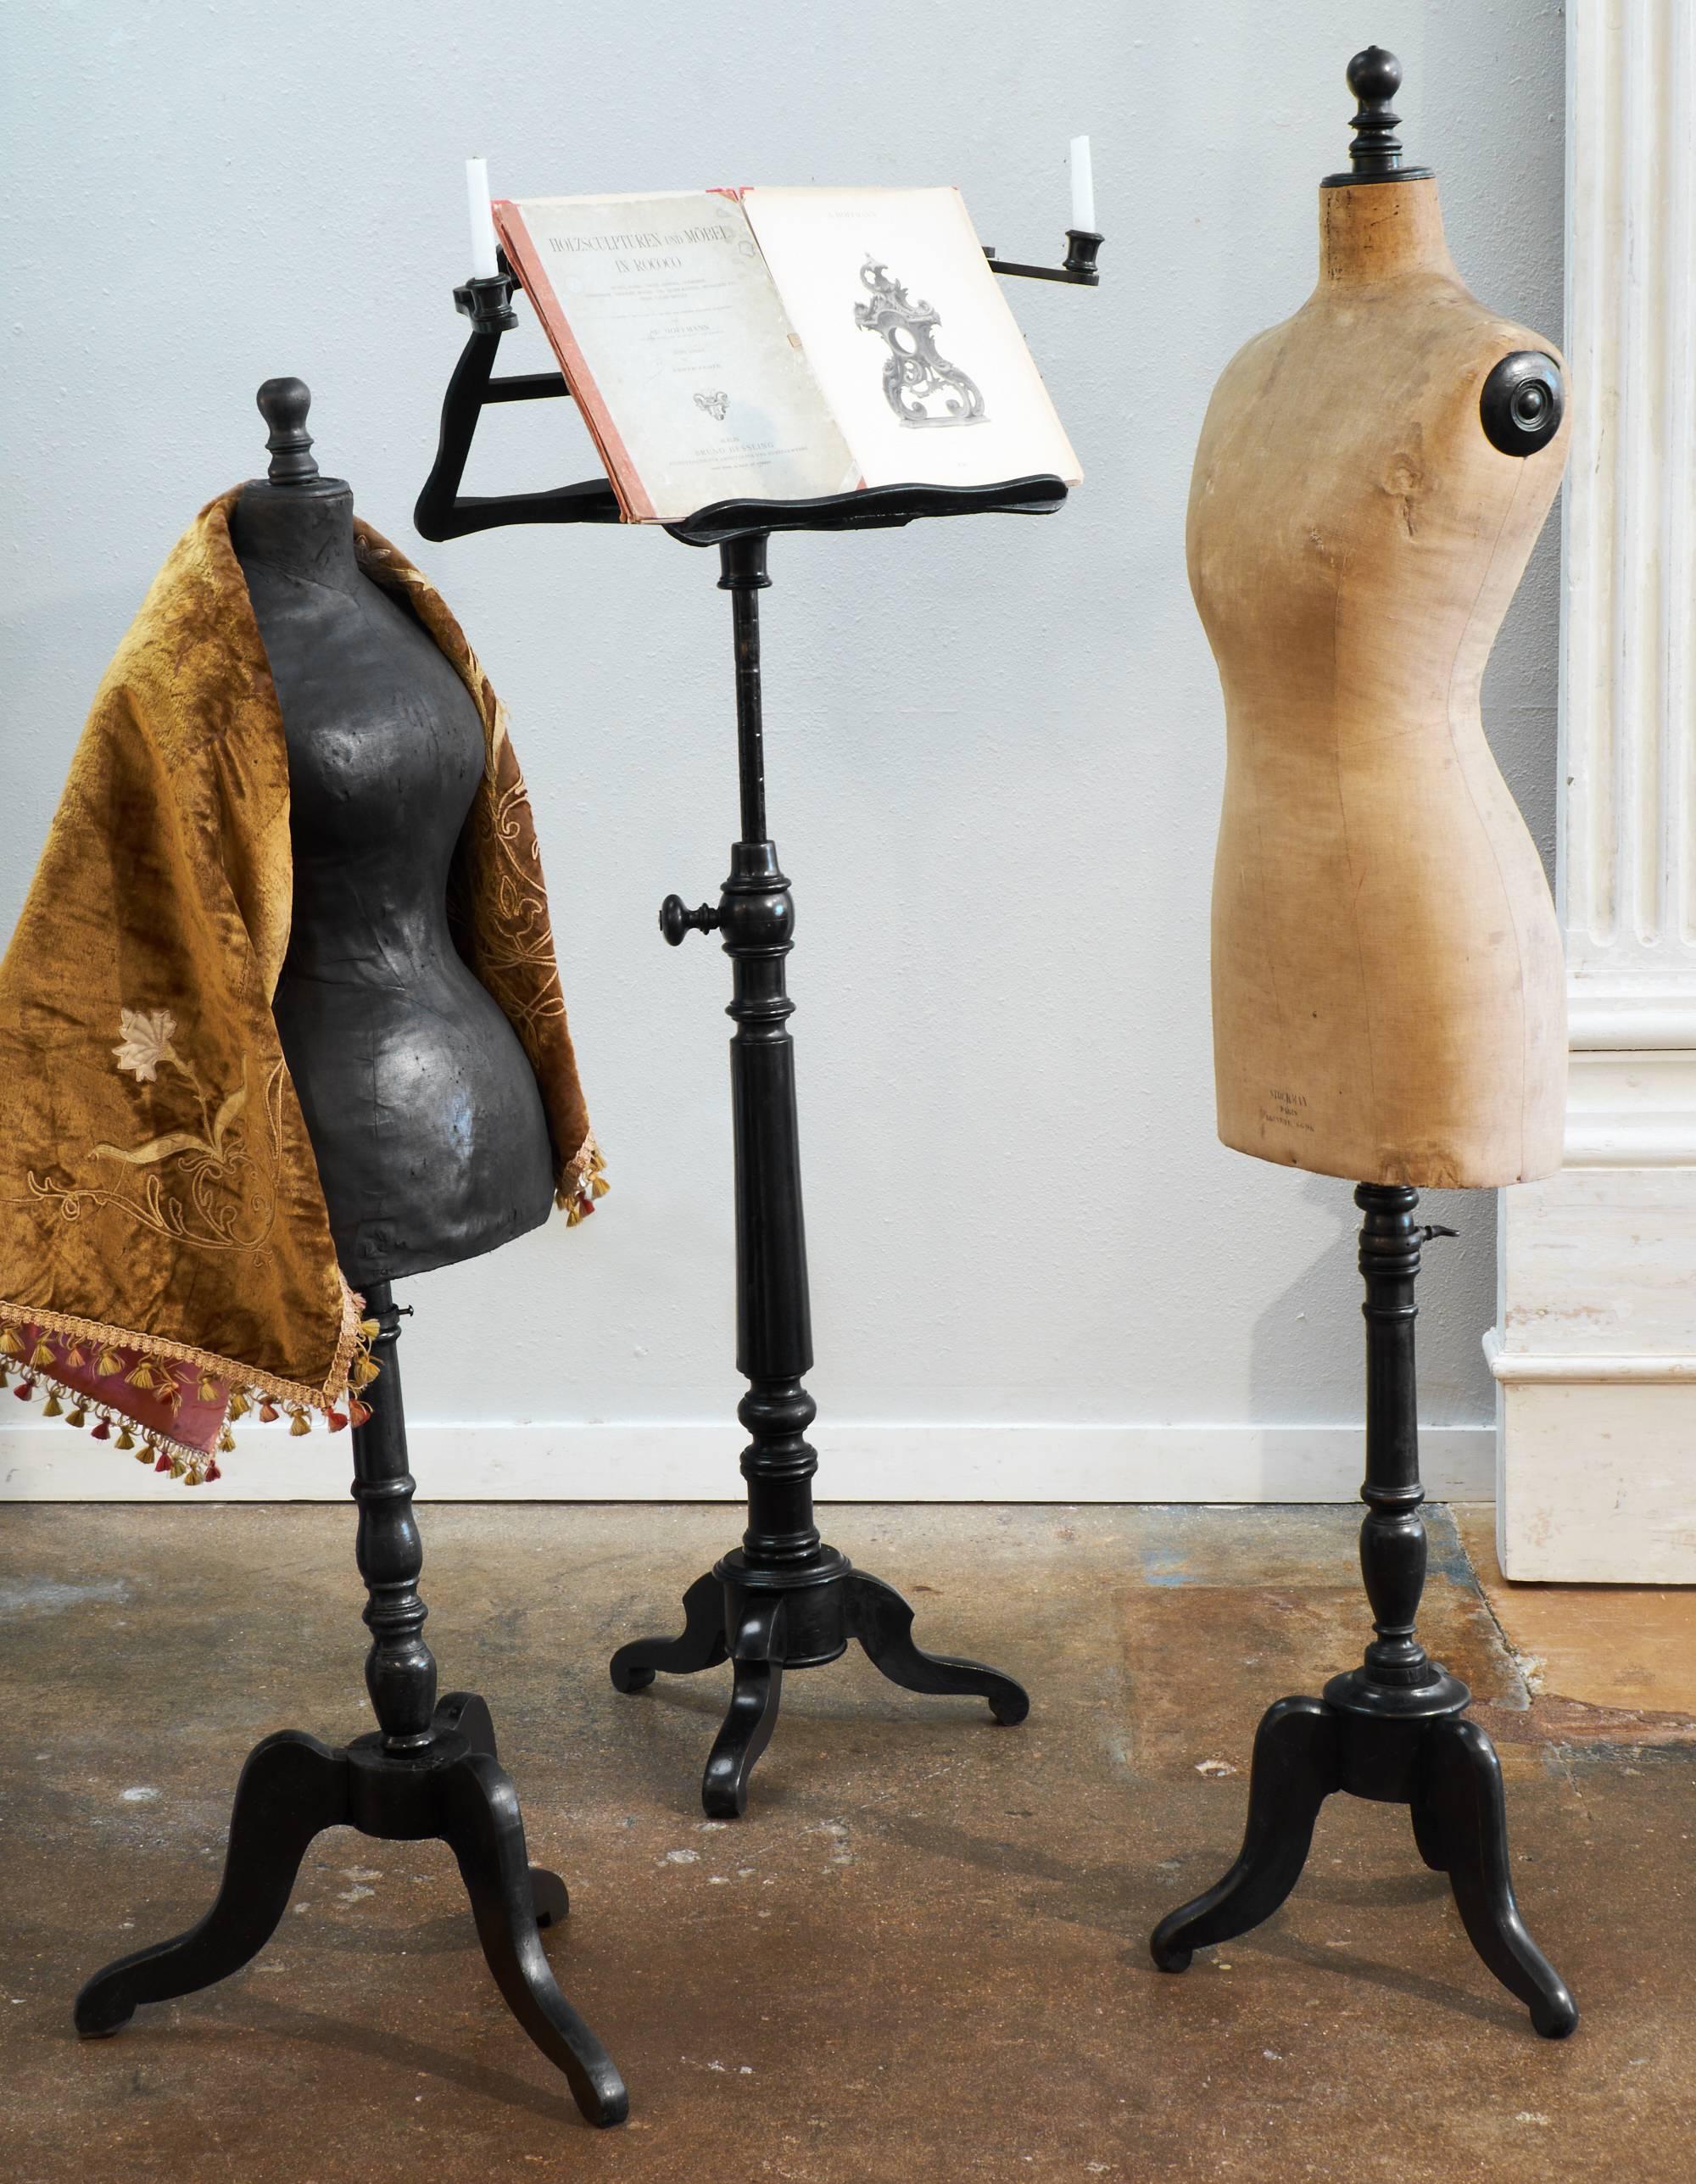 Originally used by Parisian tailors and dressmakers for draping, alterations, and creating the latest French fashions, these vintage dressmaker mannequins are also a great piece of decor. These adjustable height dress forms have ebonized and French